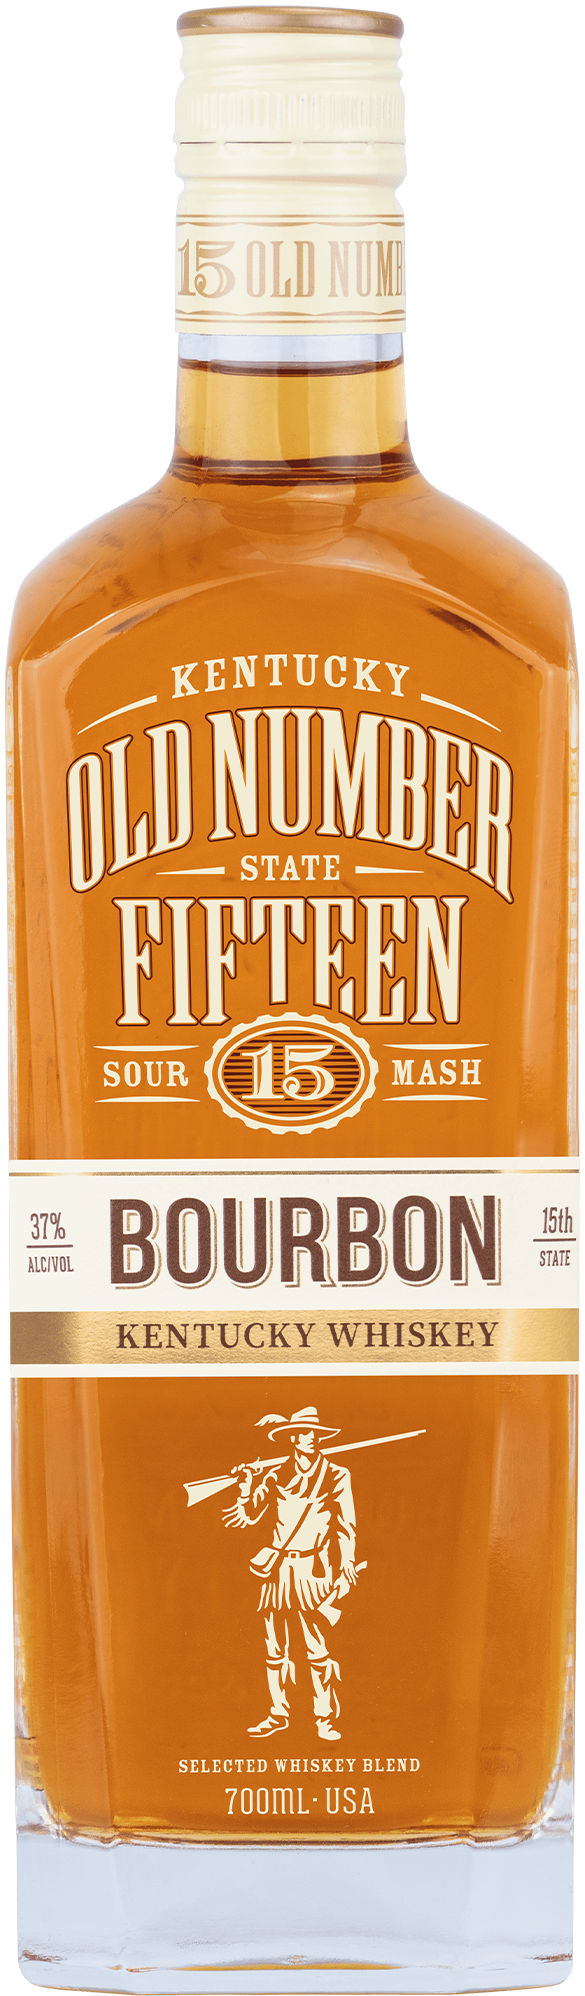 Old Number Fifteen Bourbon Whiskey 700ml